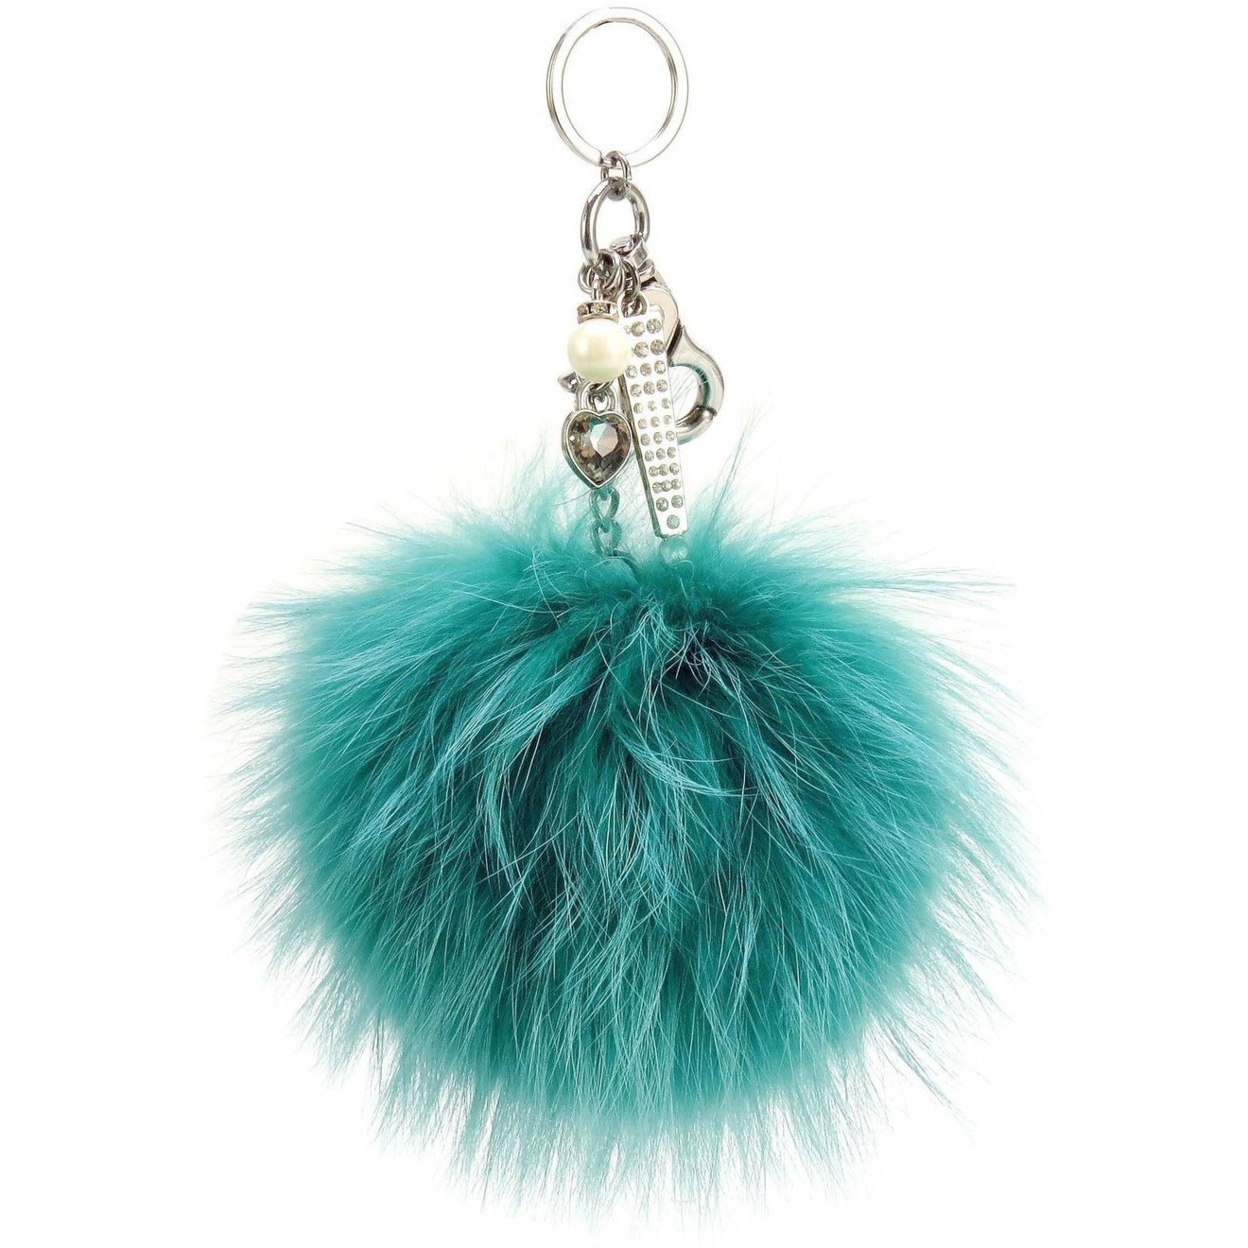 Real Fur Puff Ball Pom-Pom 6 Accessory Dangle Purse Charm - Turquoise With Silver Hardware